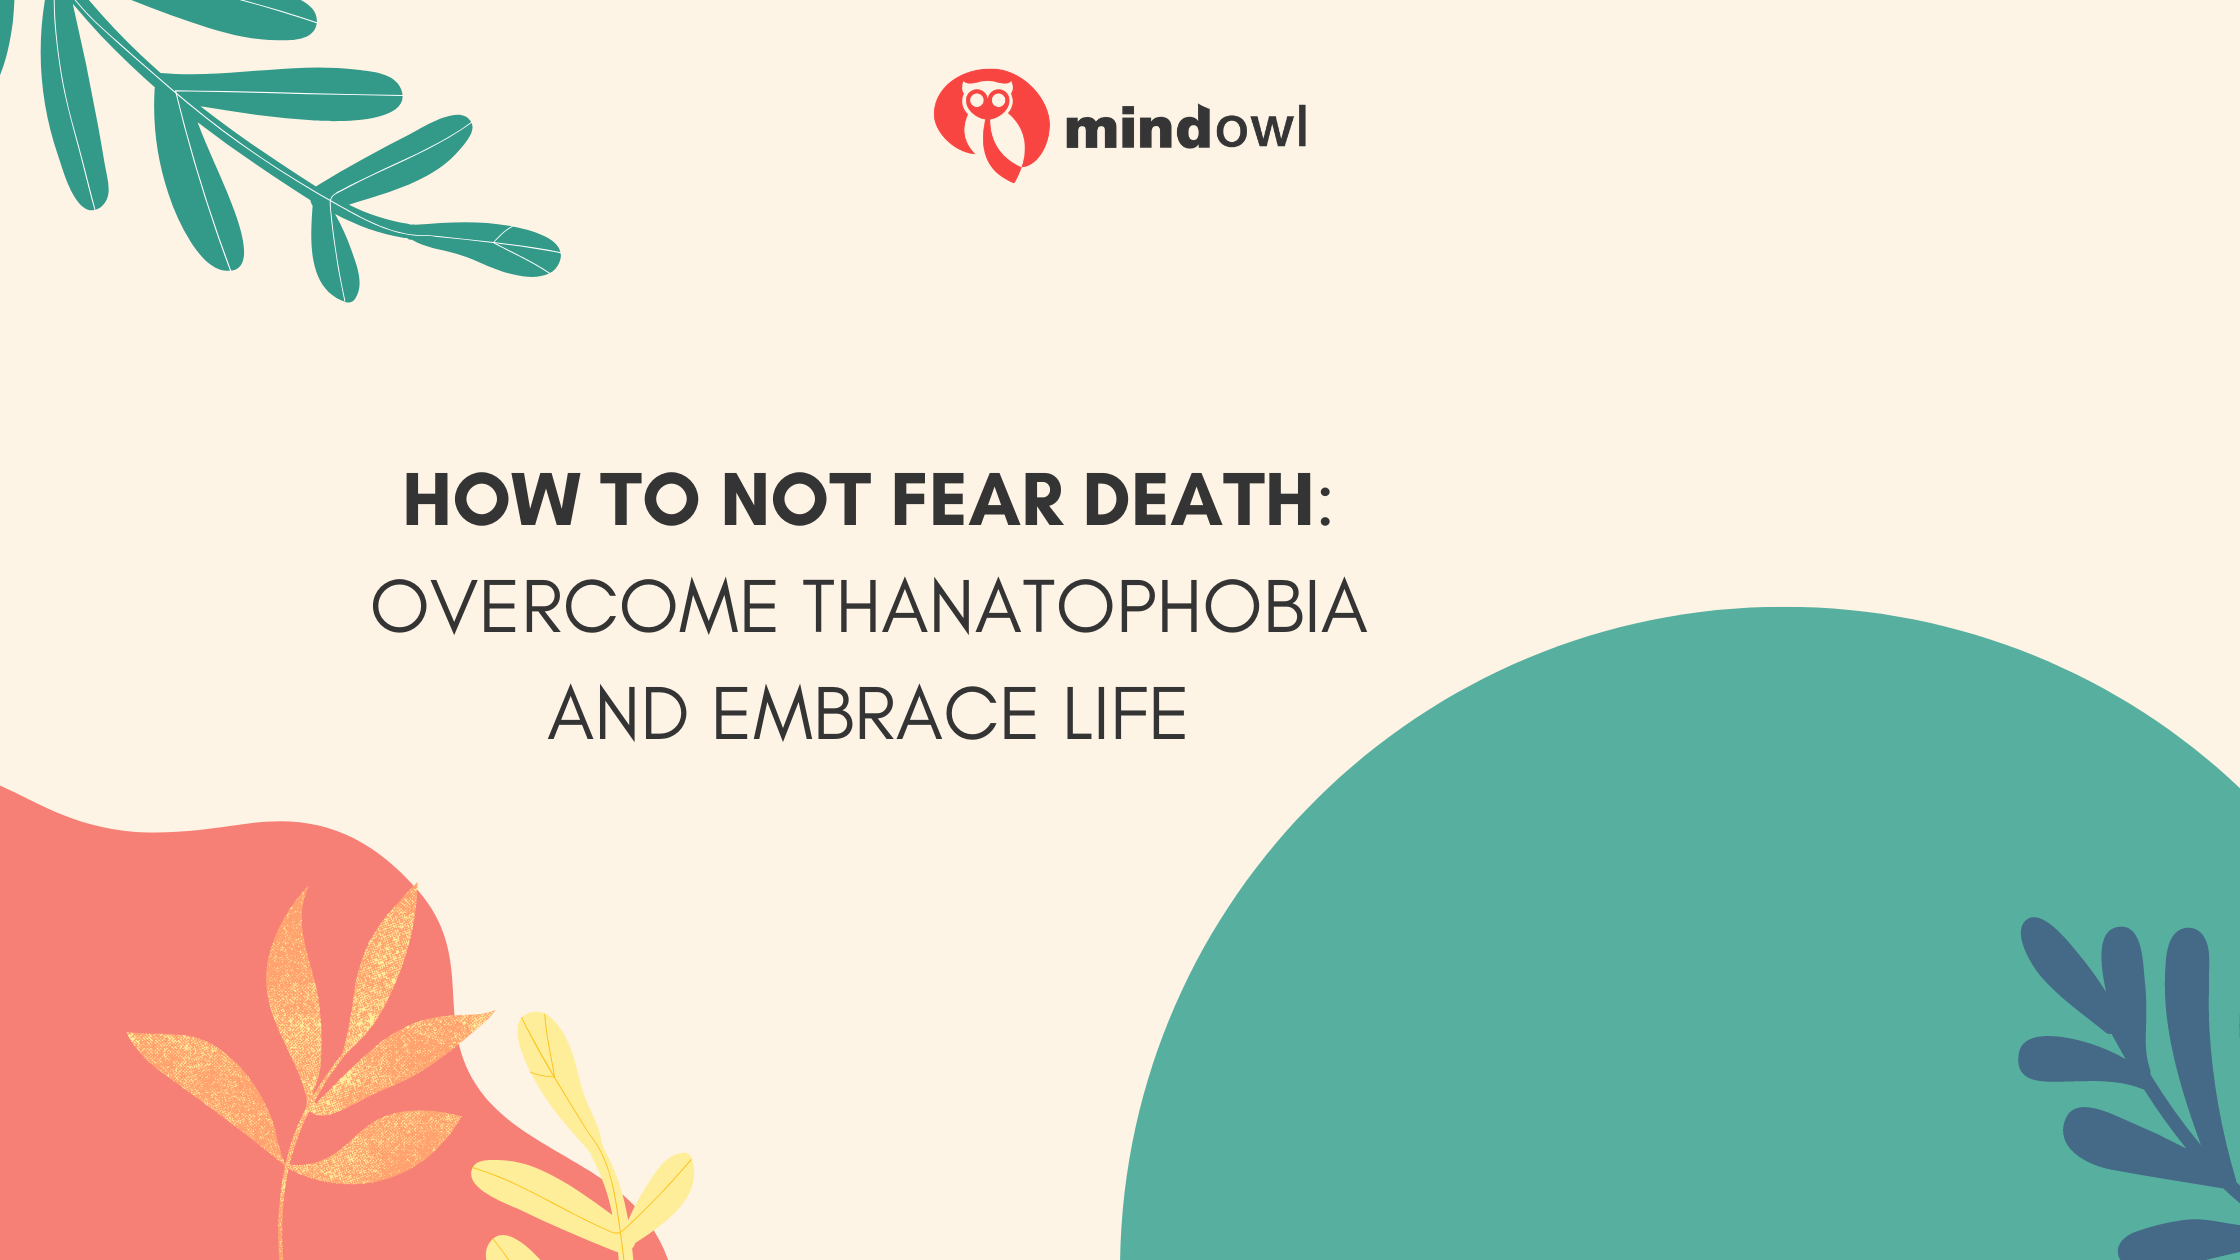 How To Not Fear Death: Overcome Thanatophobia And Embrace Life